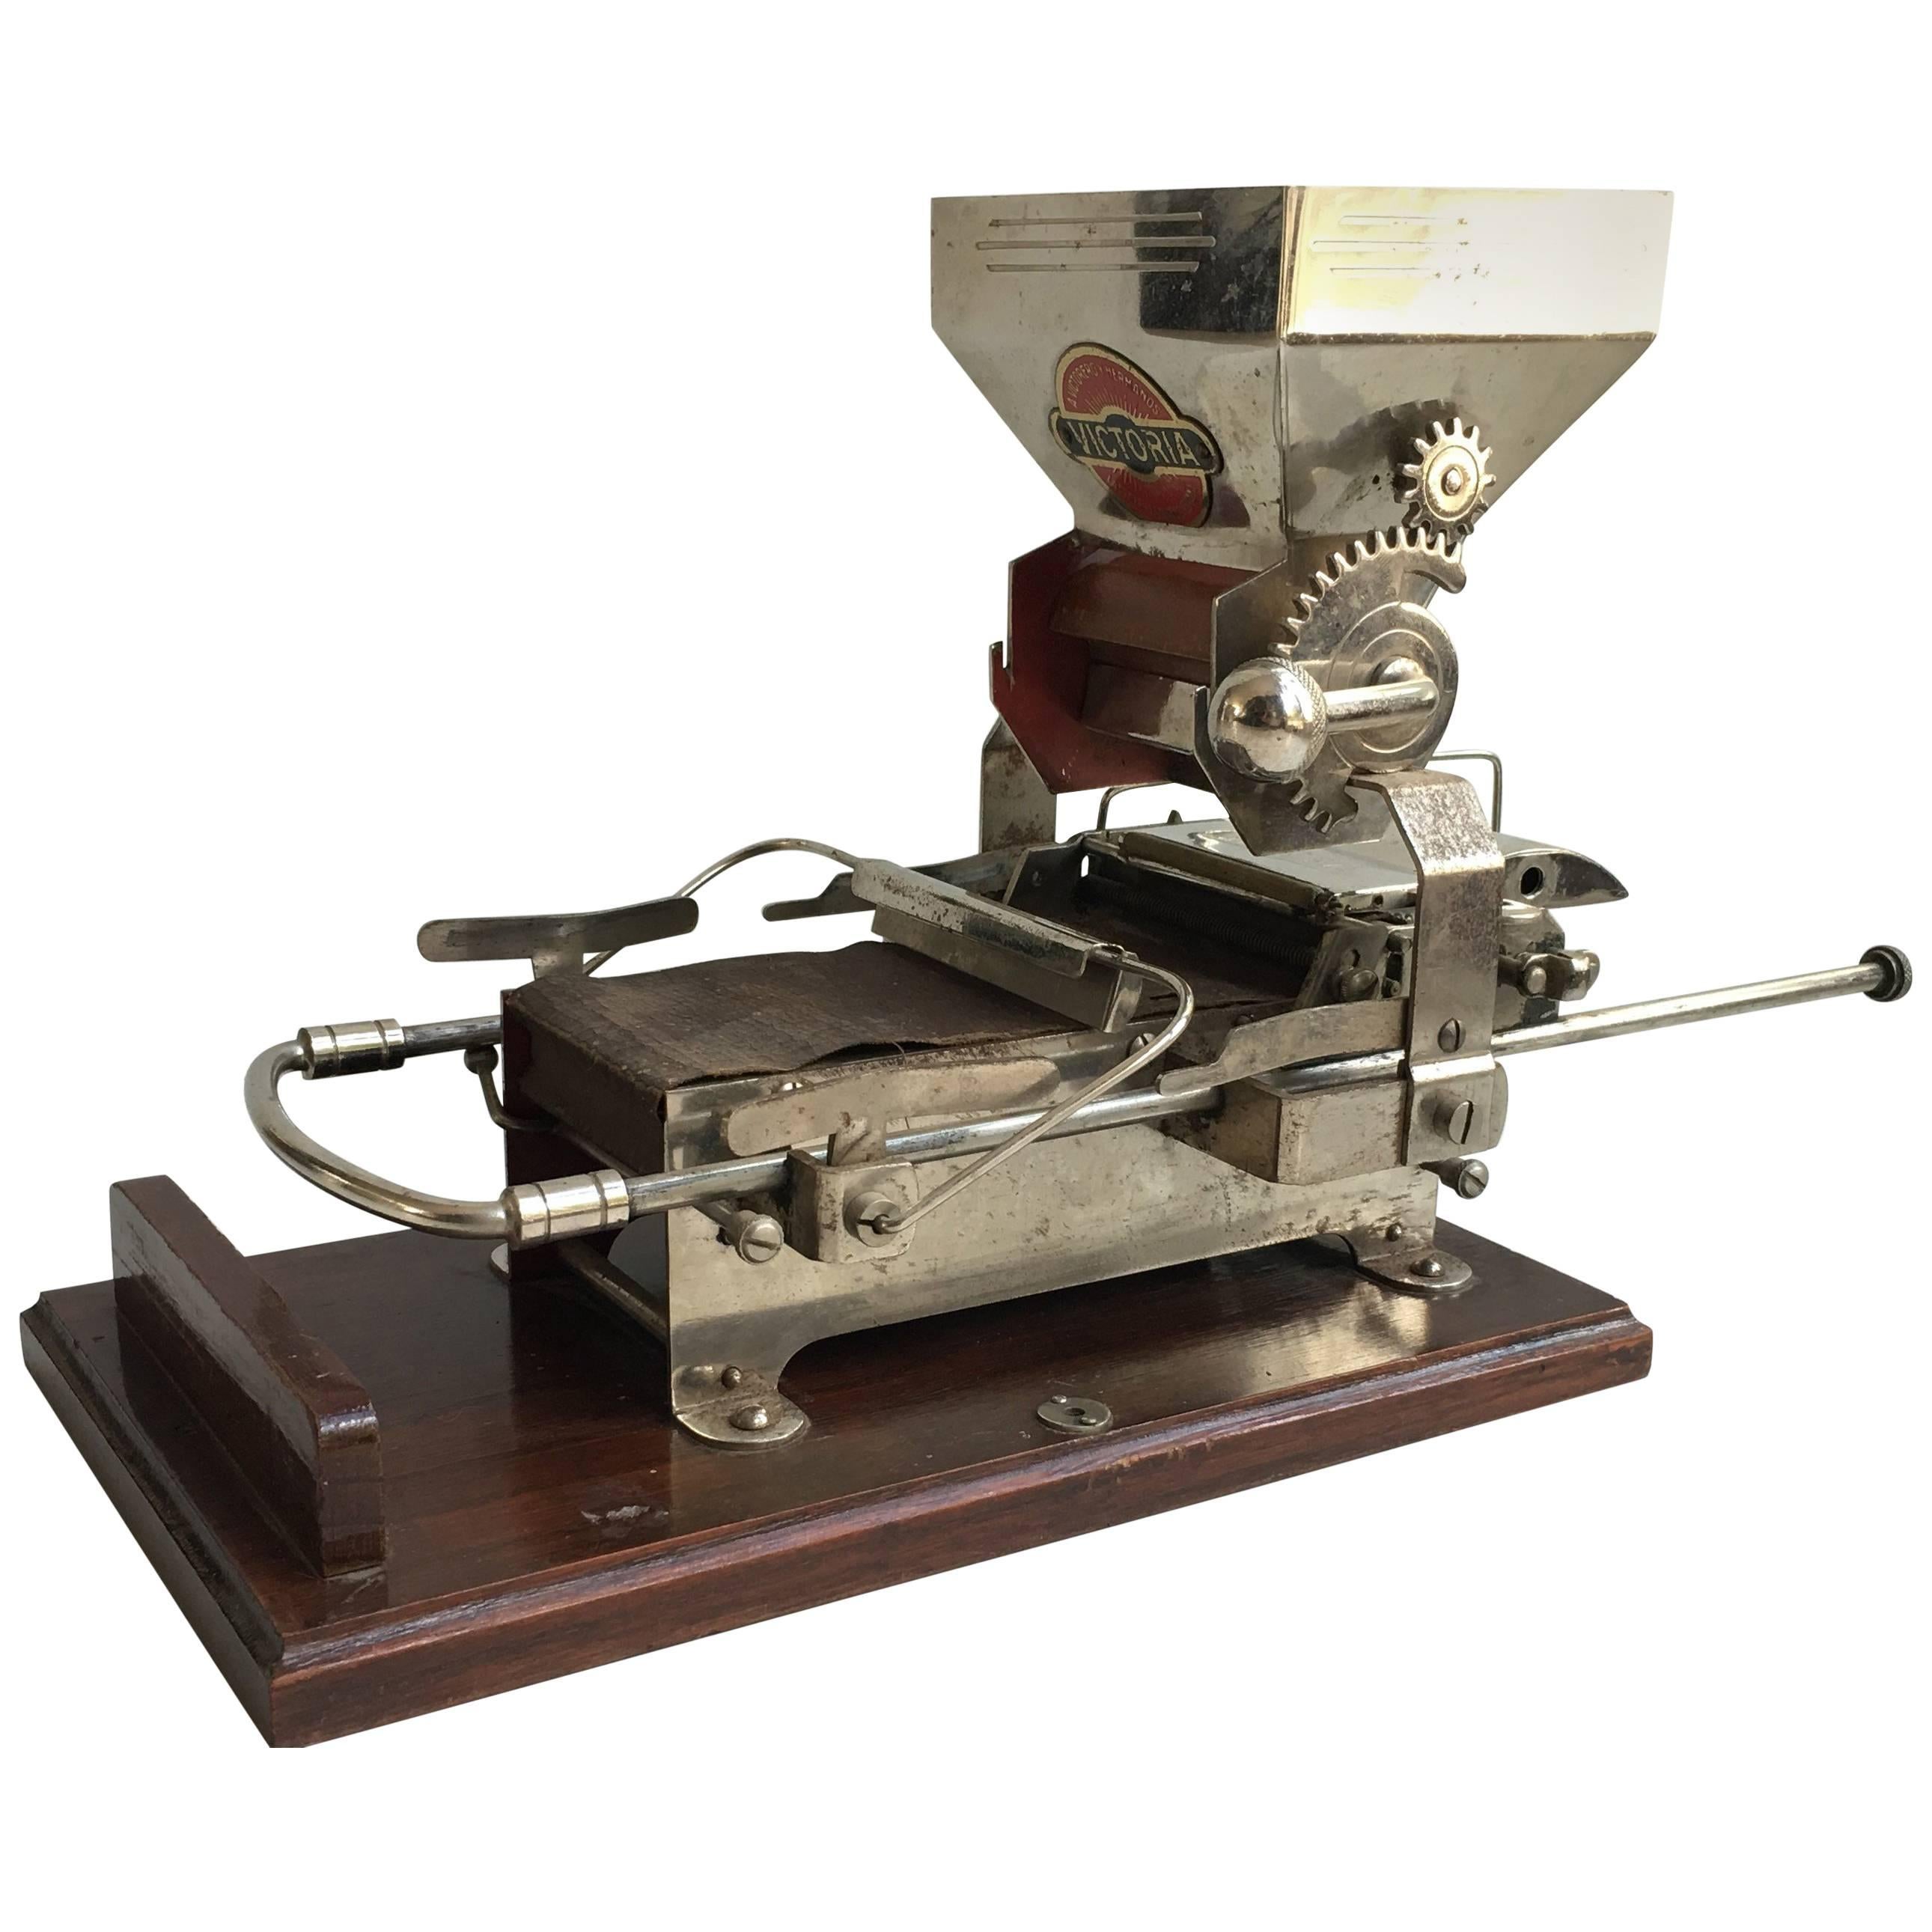 1920 Vintage Automatic Machine for Rolling Tobacco